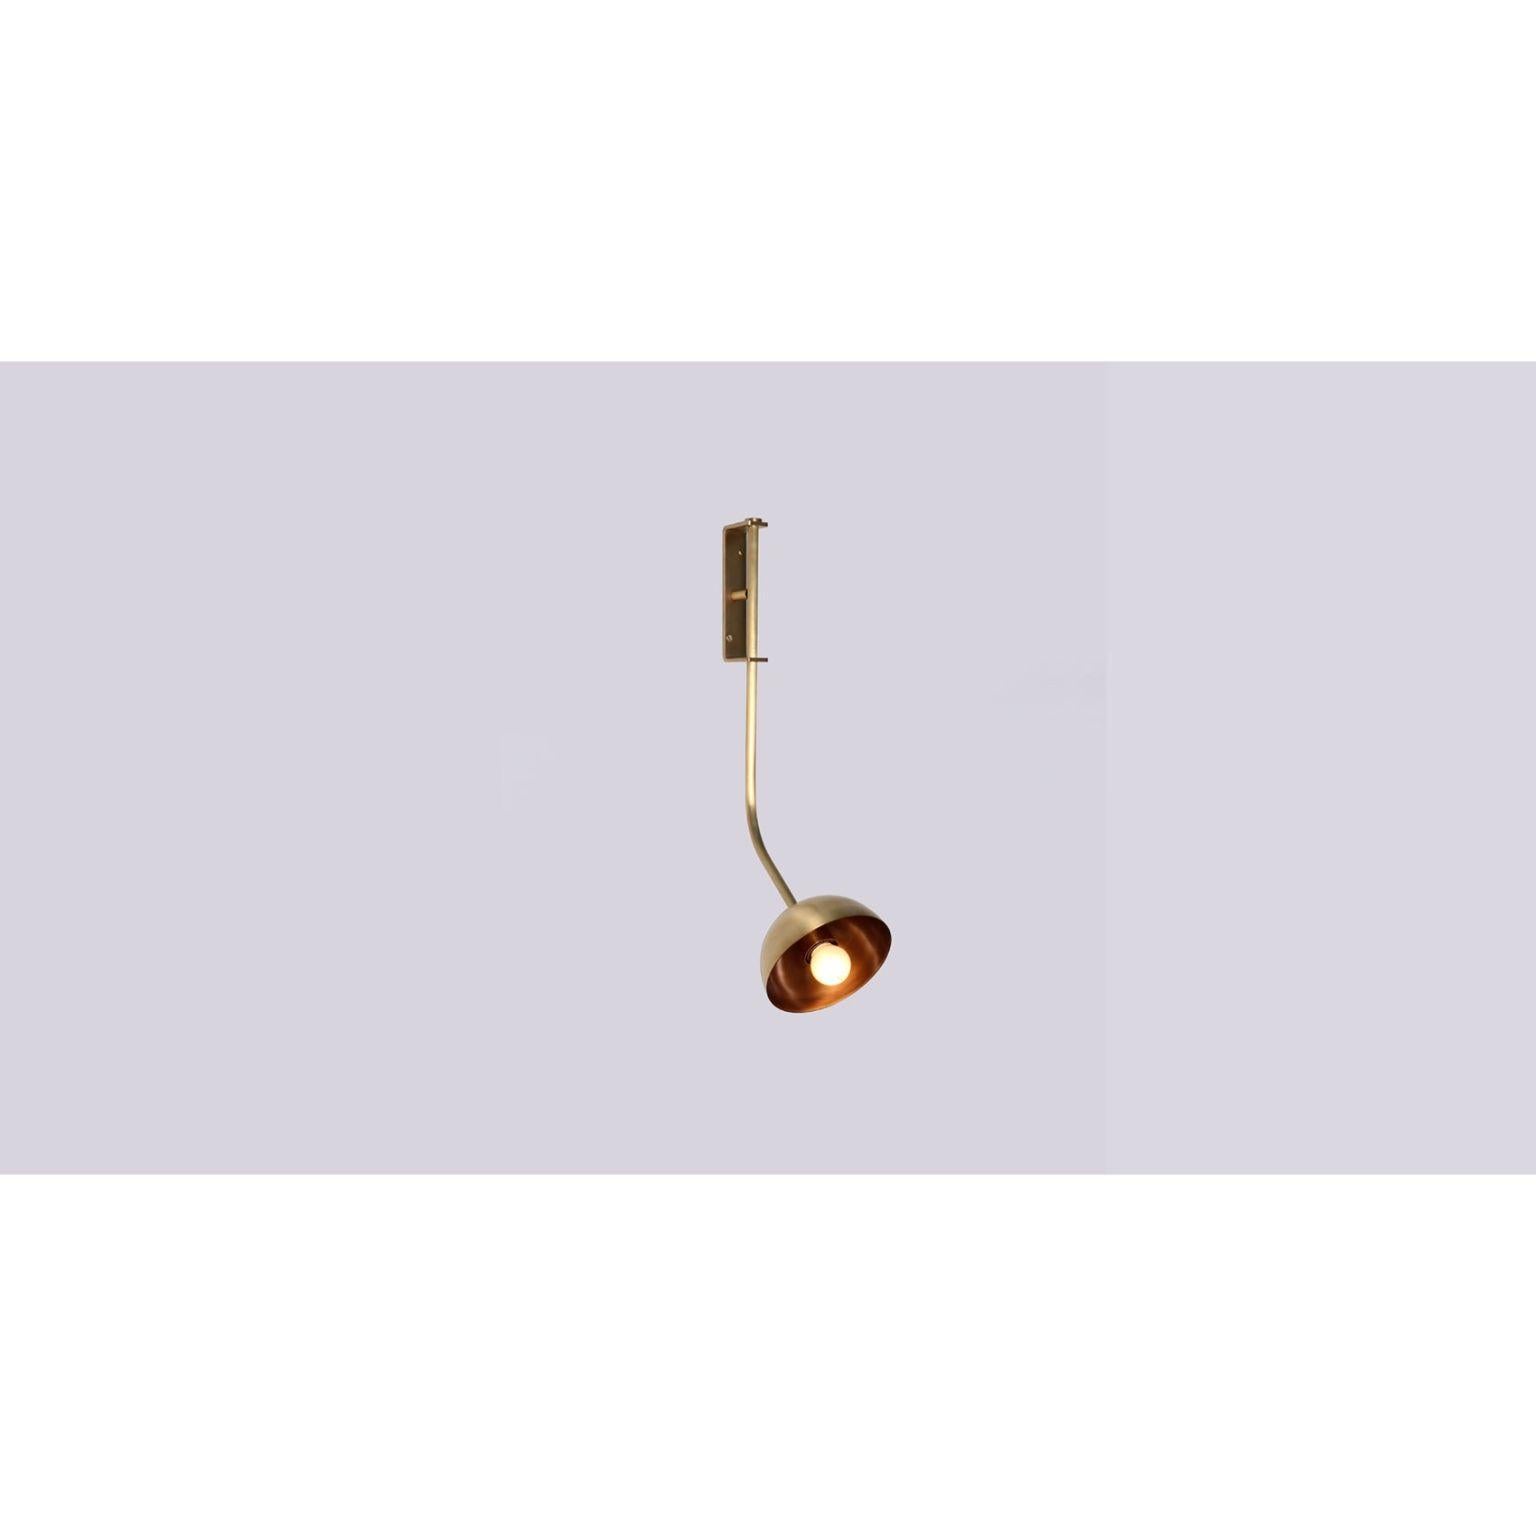 Rhythm Brass Dome Wall Sconce by Lamp Shaper
Dimensions: D 33 x W 27 x H 58.5 cm.
Materials: Brass.

Different finishes available: raw brass, aged brass, burnt brass and brushed brass Please contact us.

All our lamps can be wired according to each